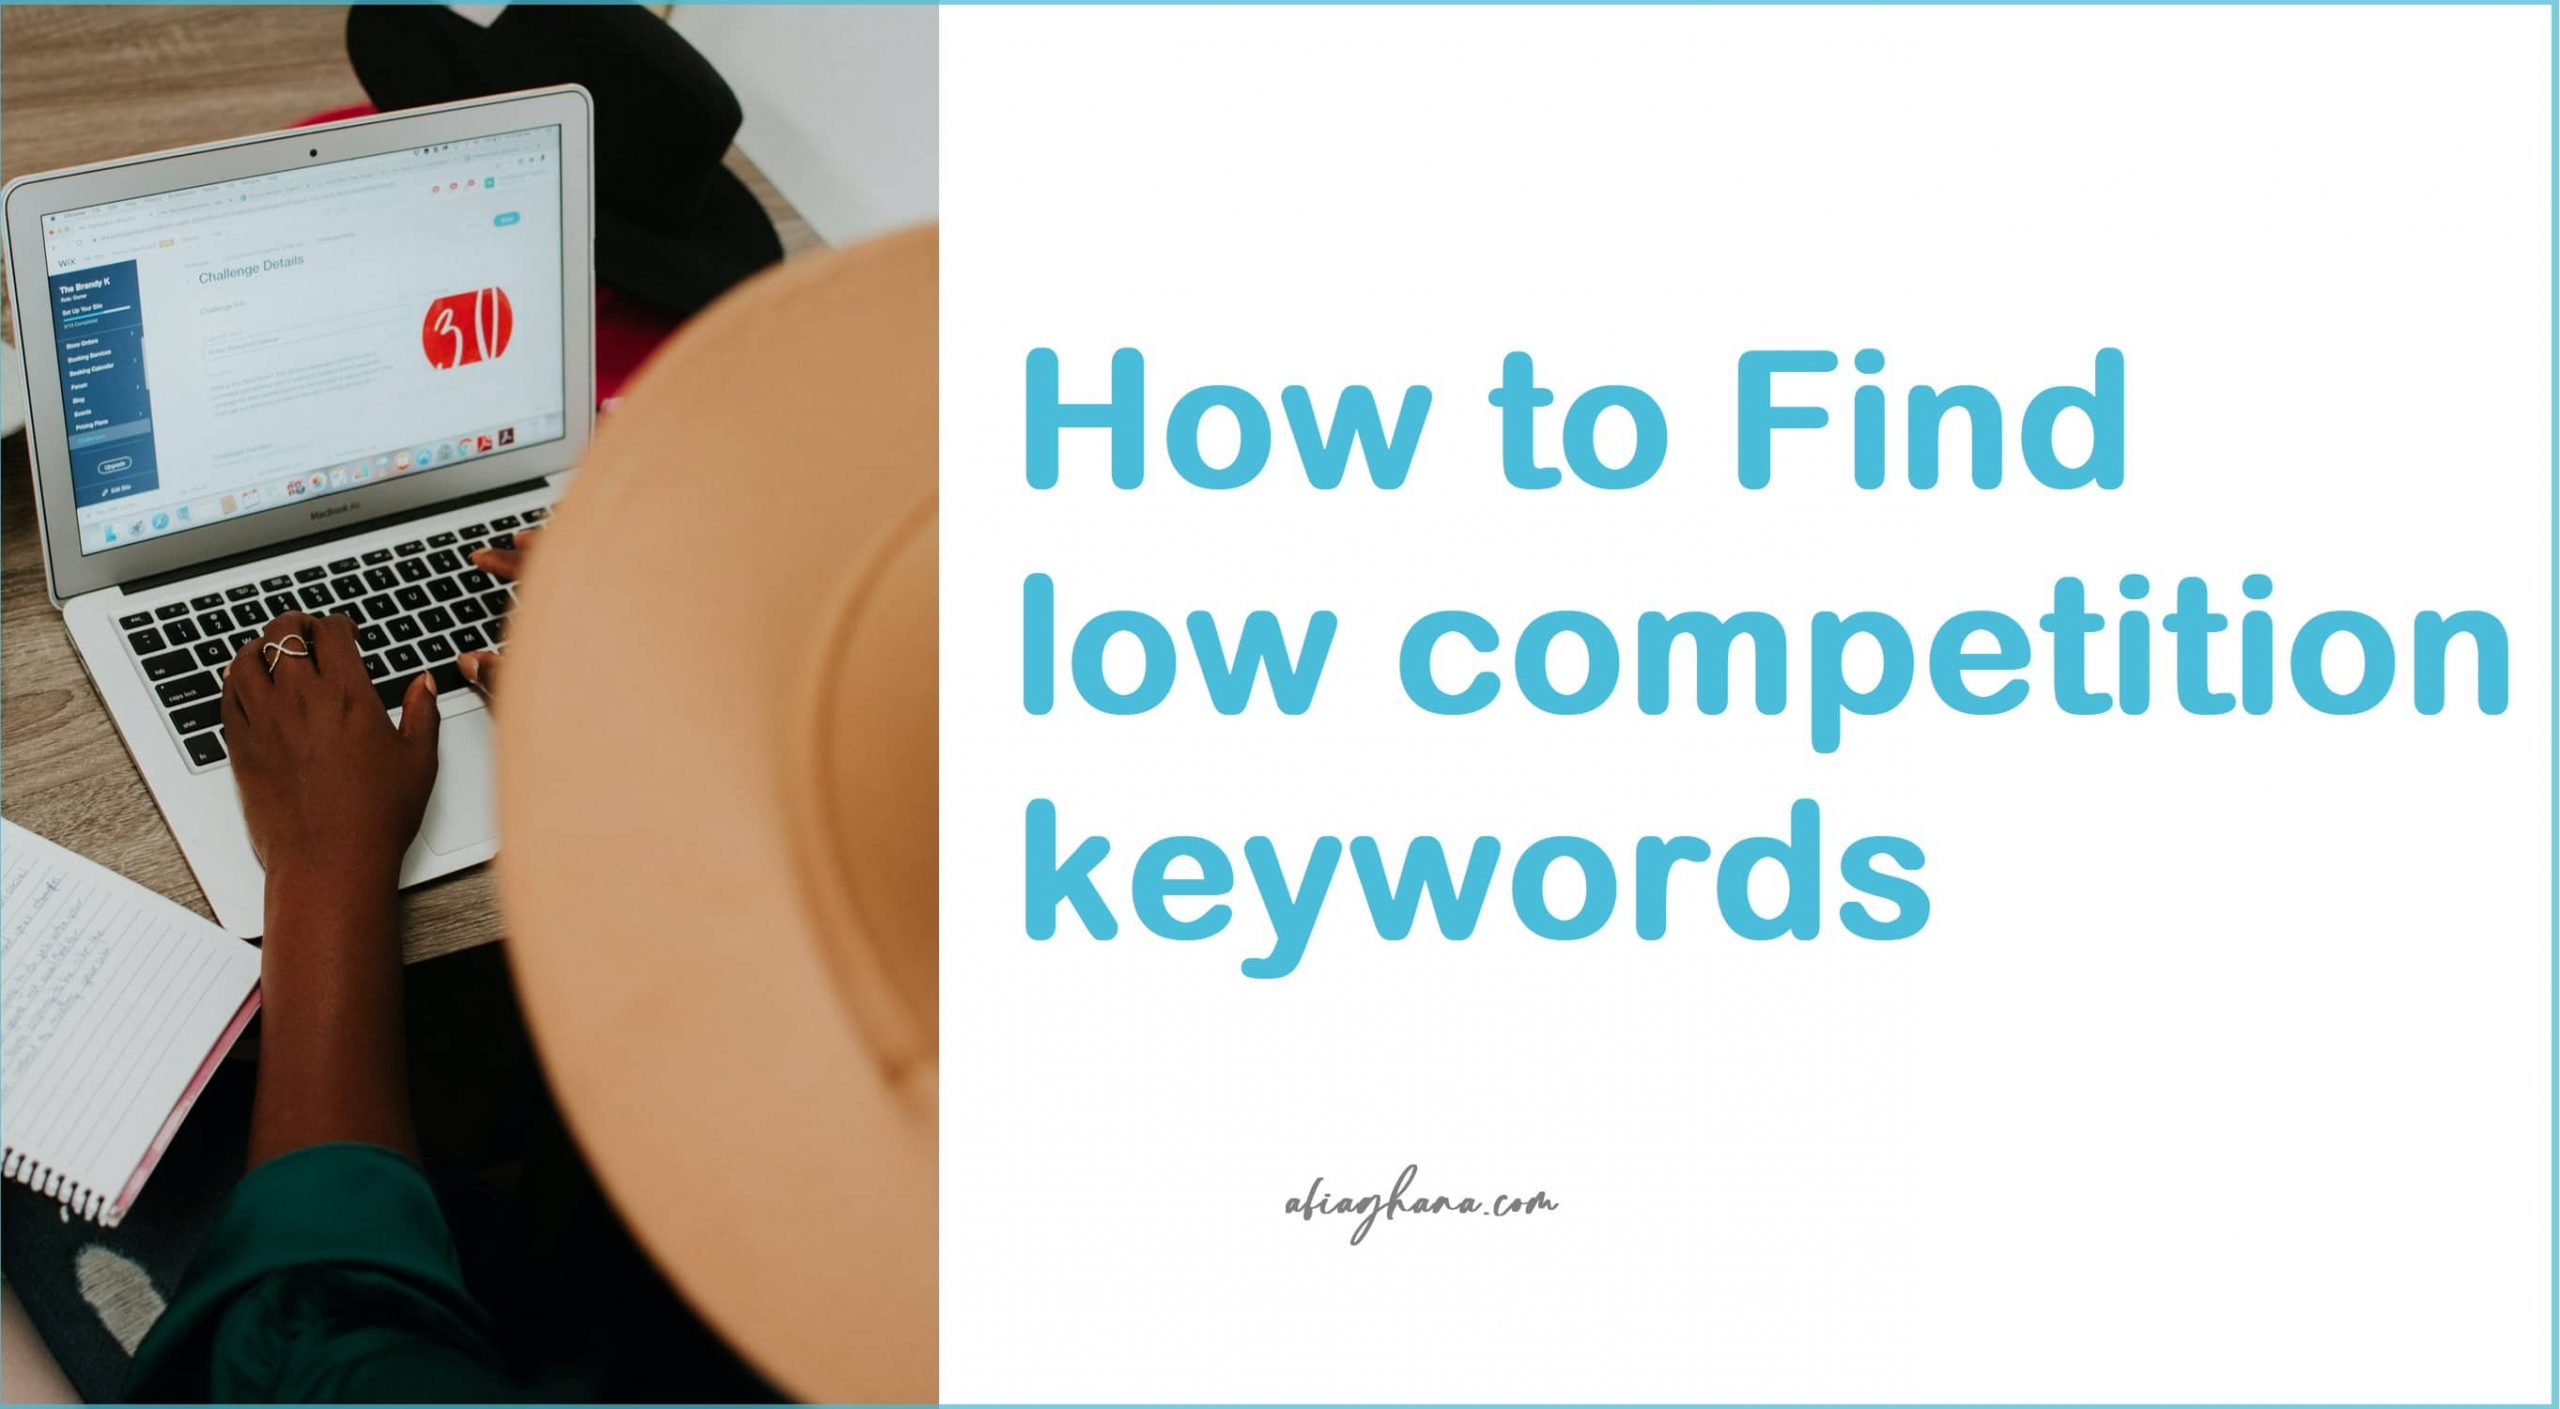 How to Find low competition keywords, high-volume keywords.